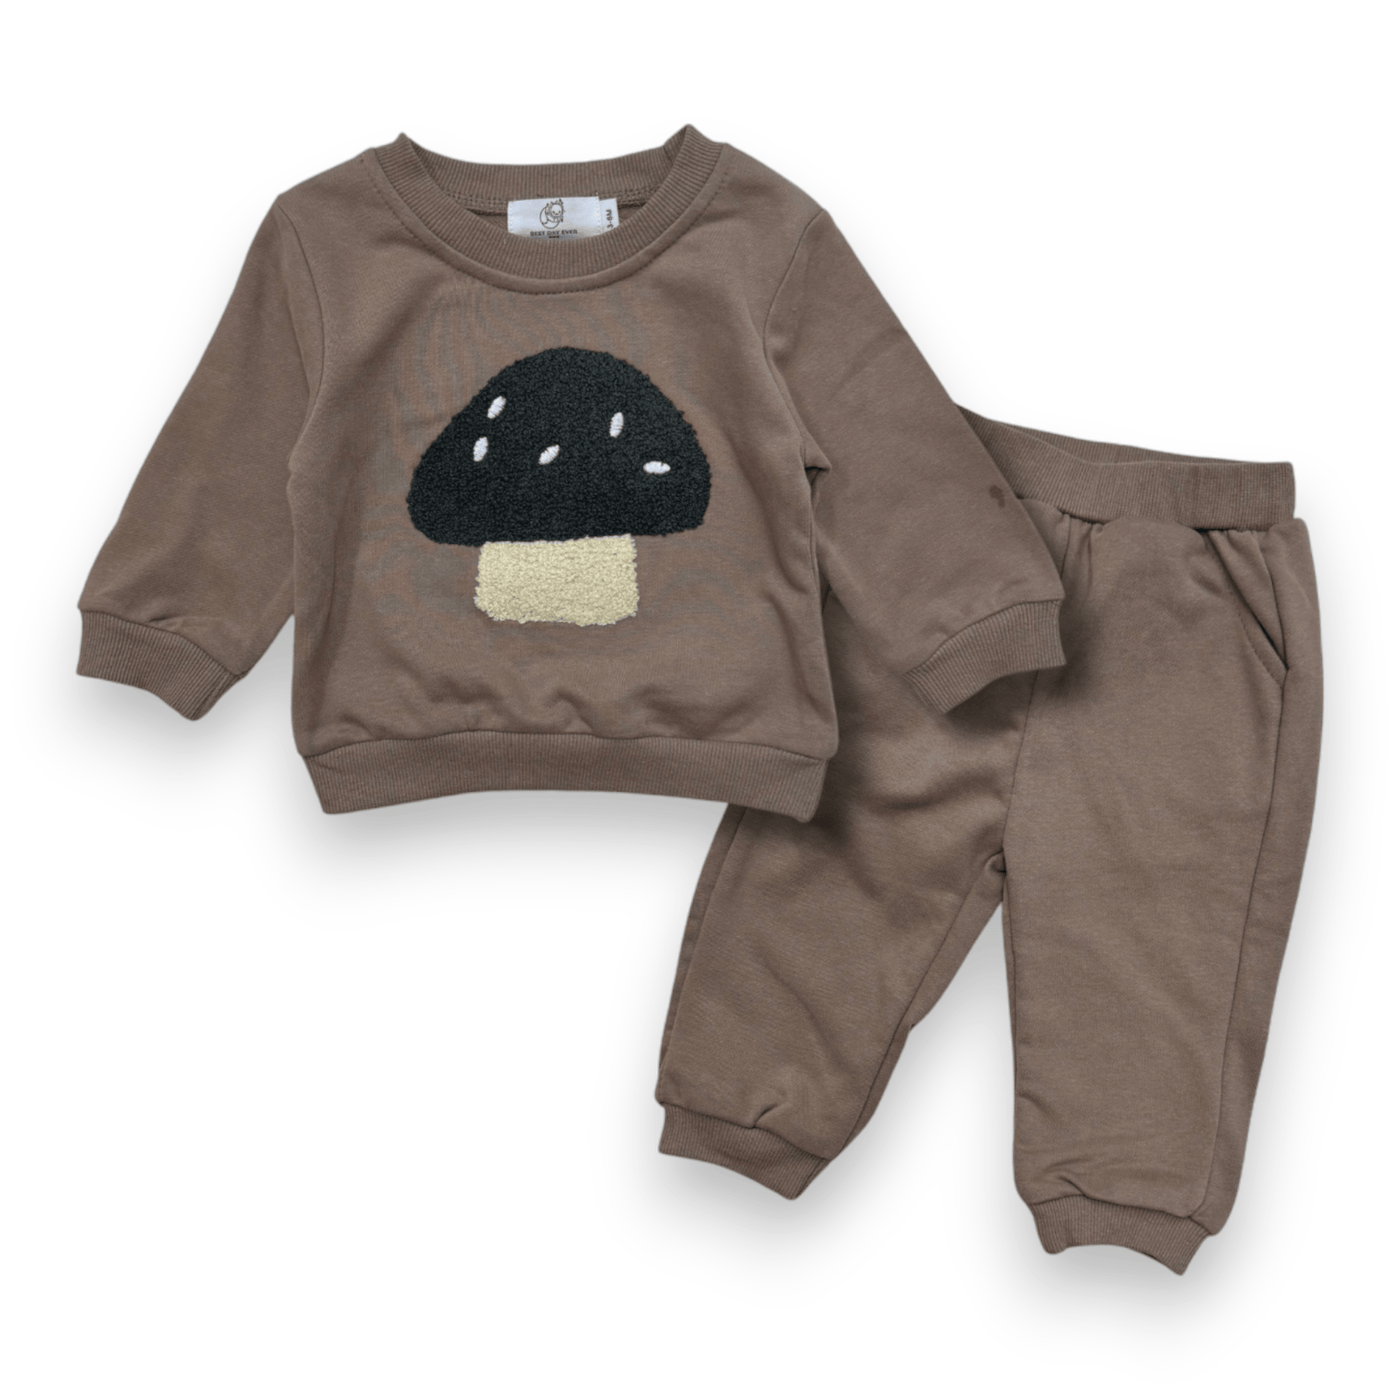 Best Day Ever Kids Baby & Toddler Outfits The Big Mushroom Sweat Set buy online boutique kids clothing